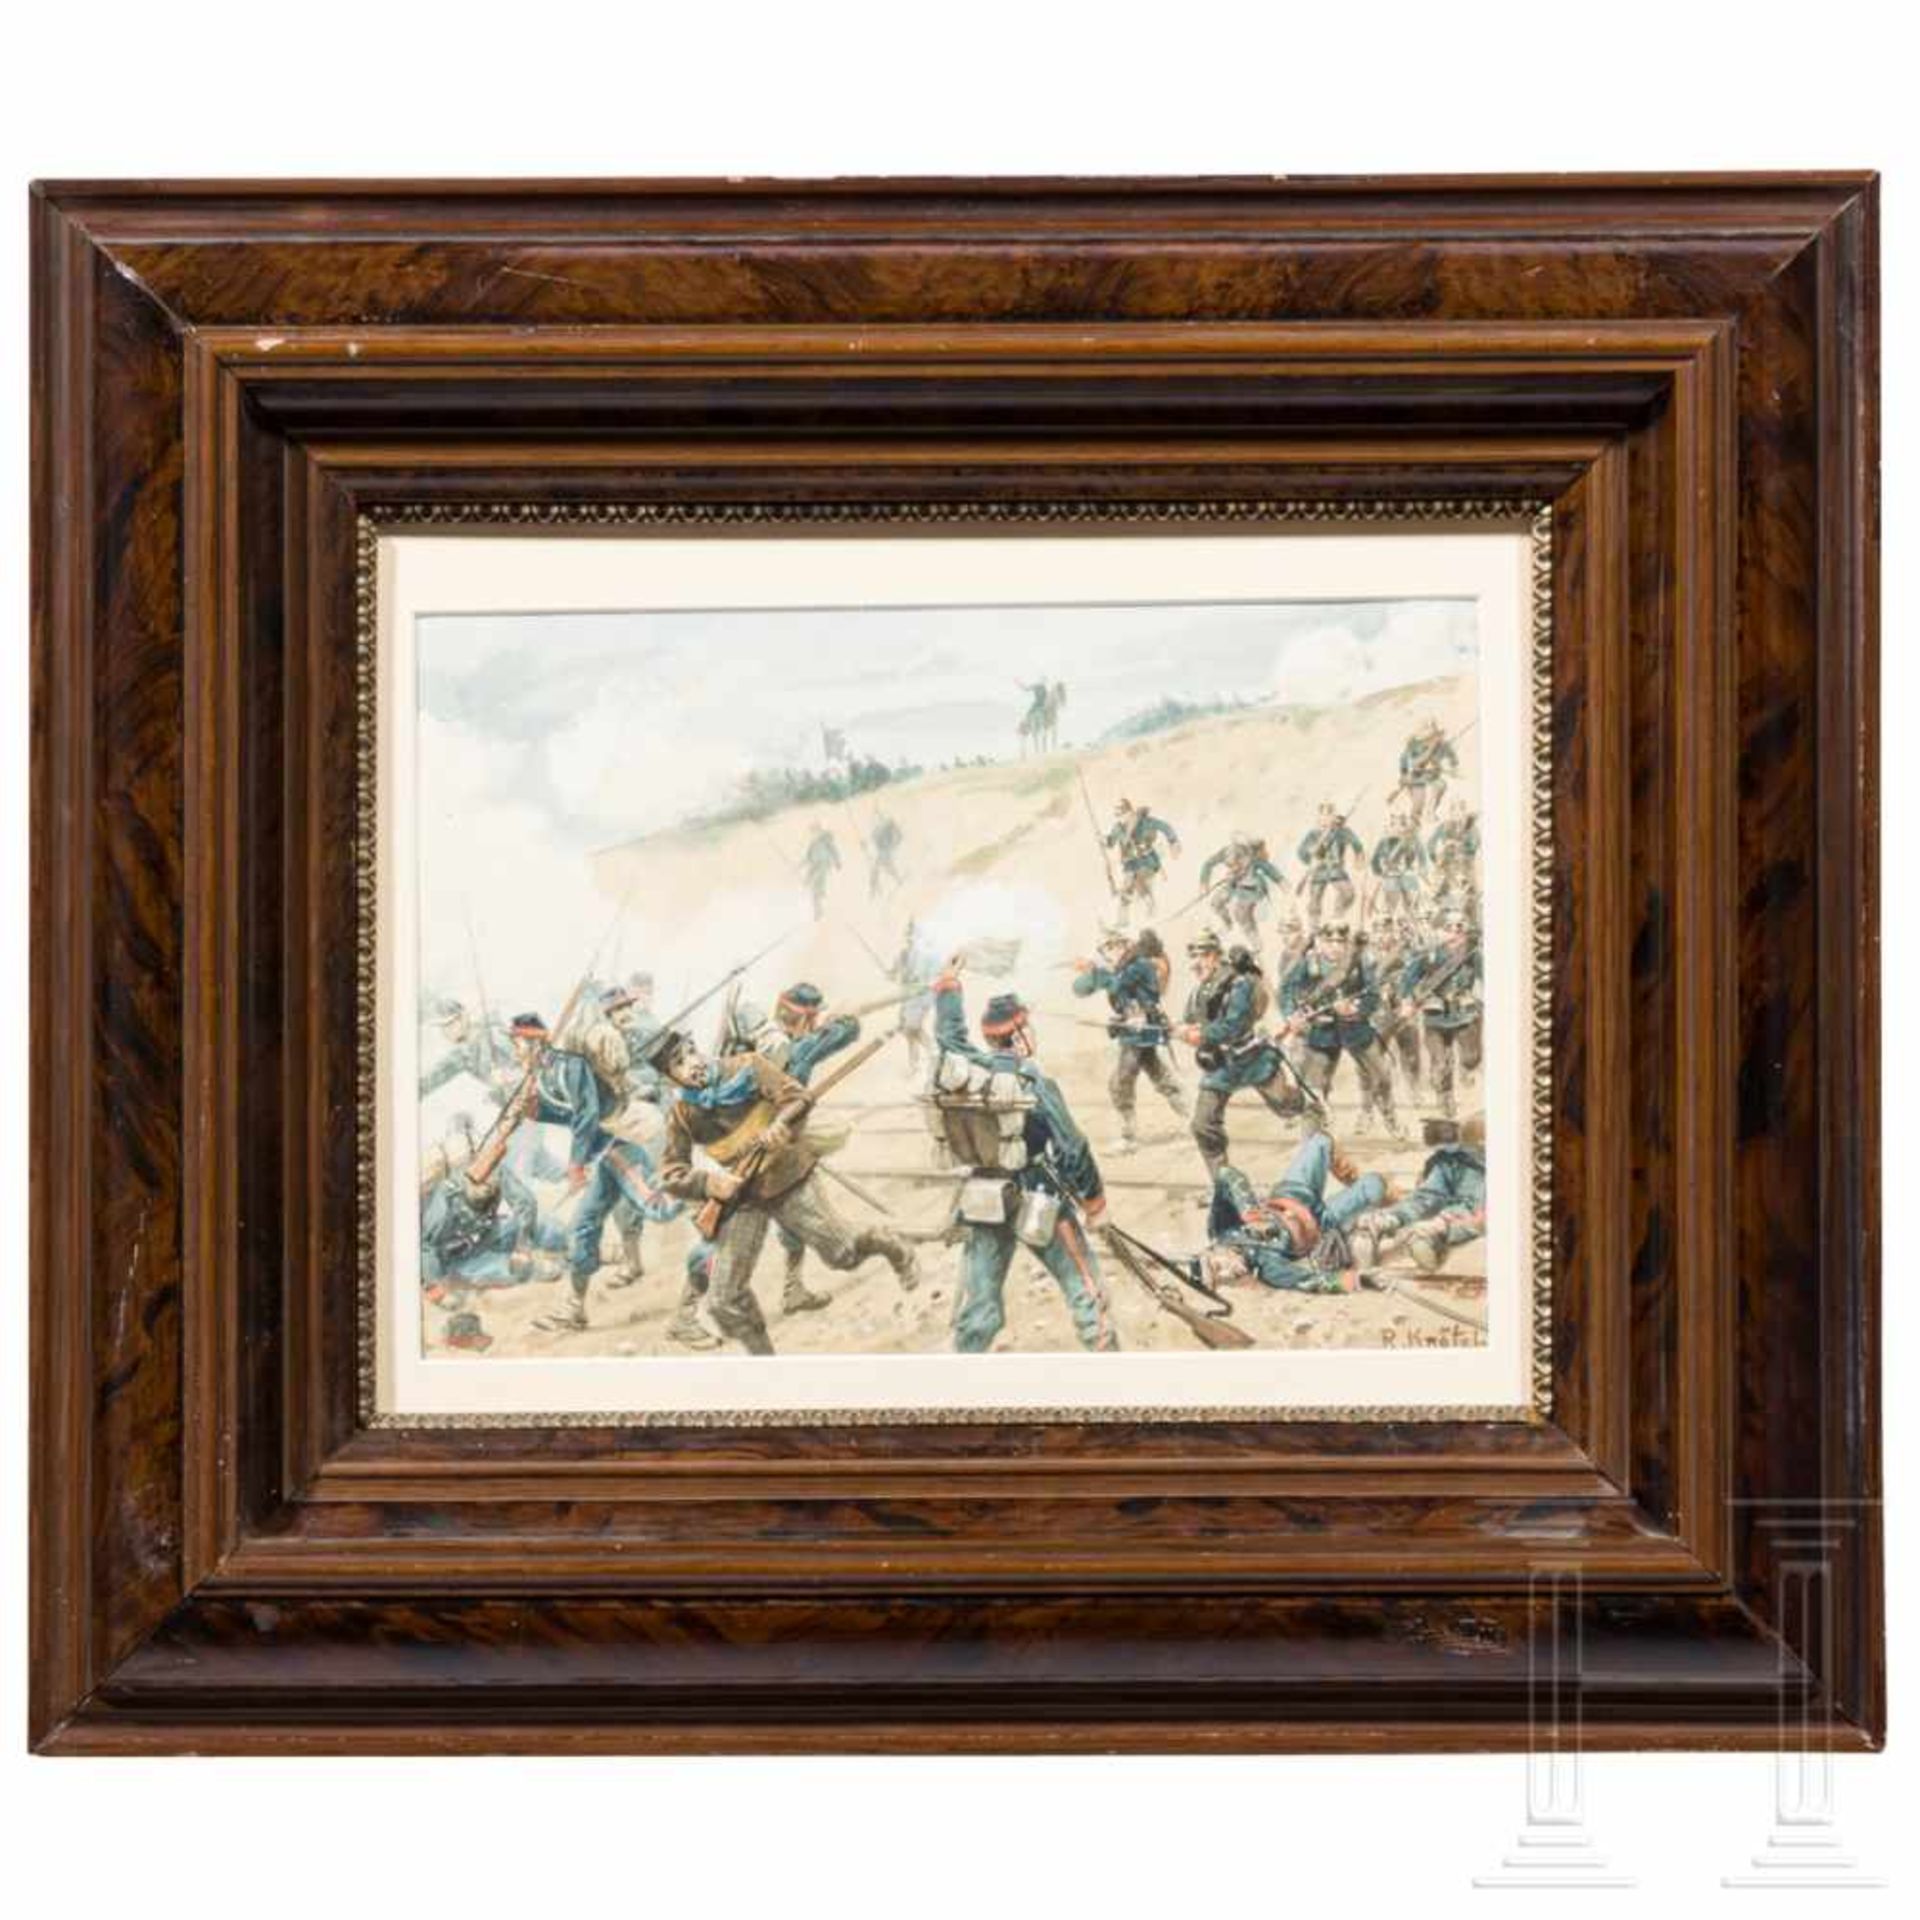 Richard Knötel (1857 - 1914) - a watercolour "The Baden soldiers at Nuits on 18 December